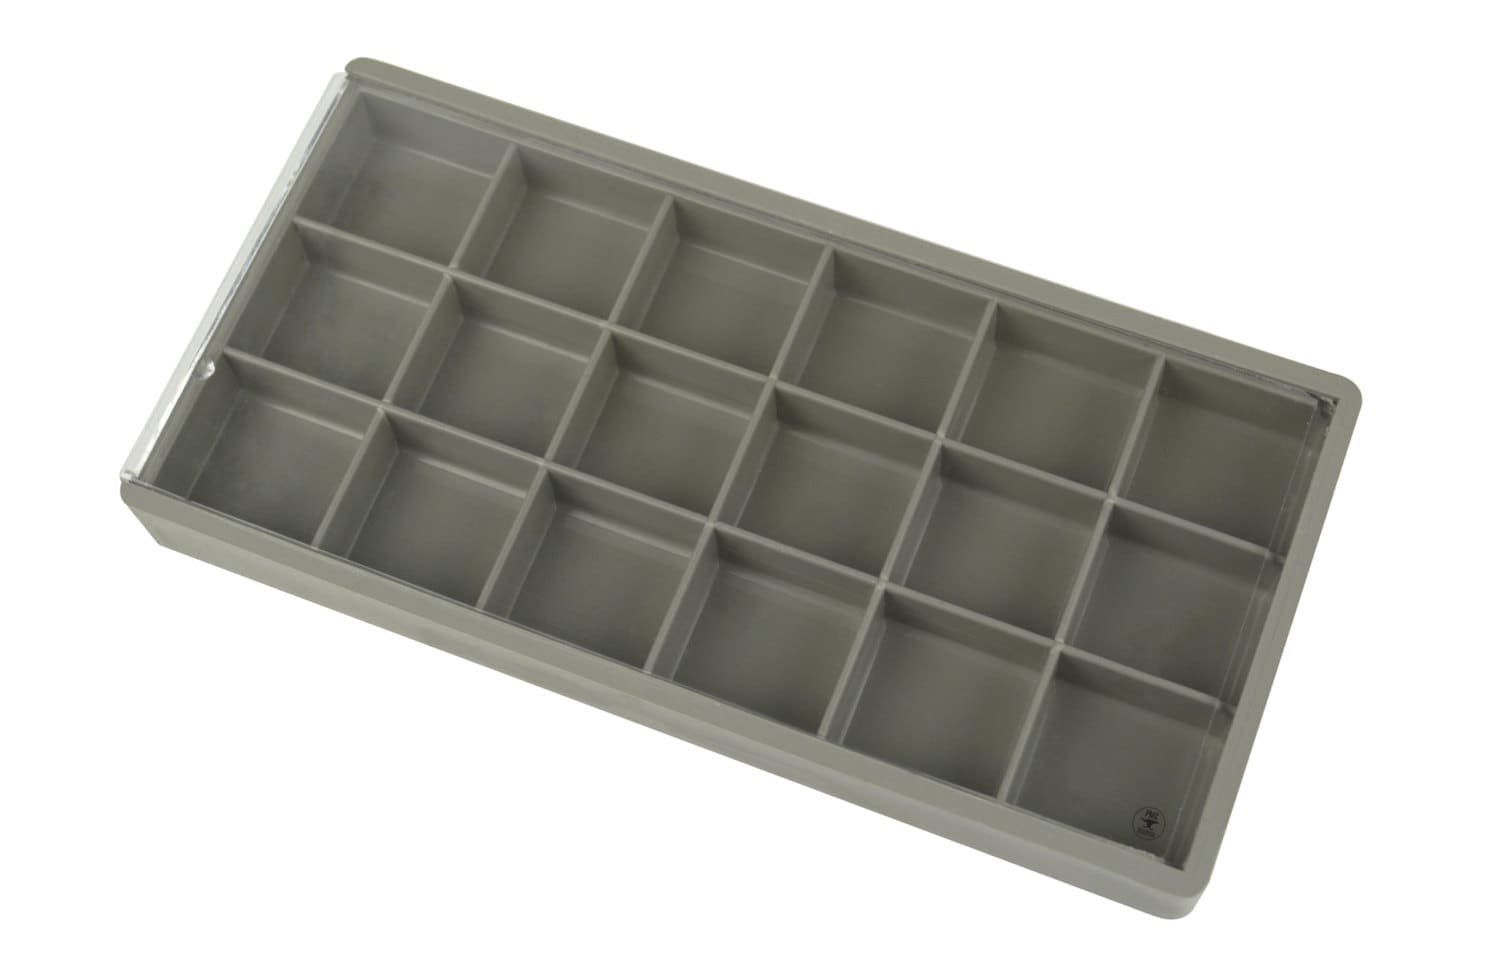 3 Black Insert Tray Liners W/ 24 Compartments Drawer Organizer